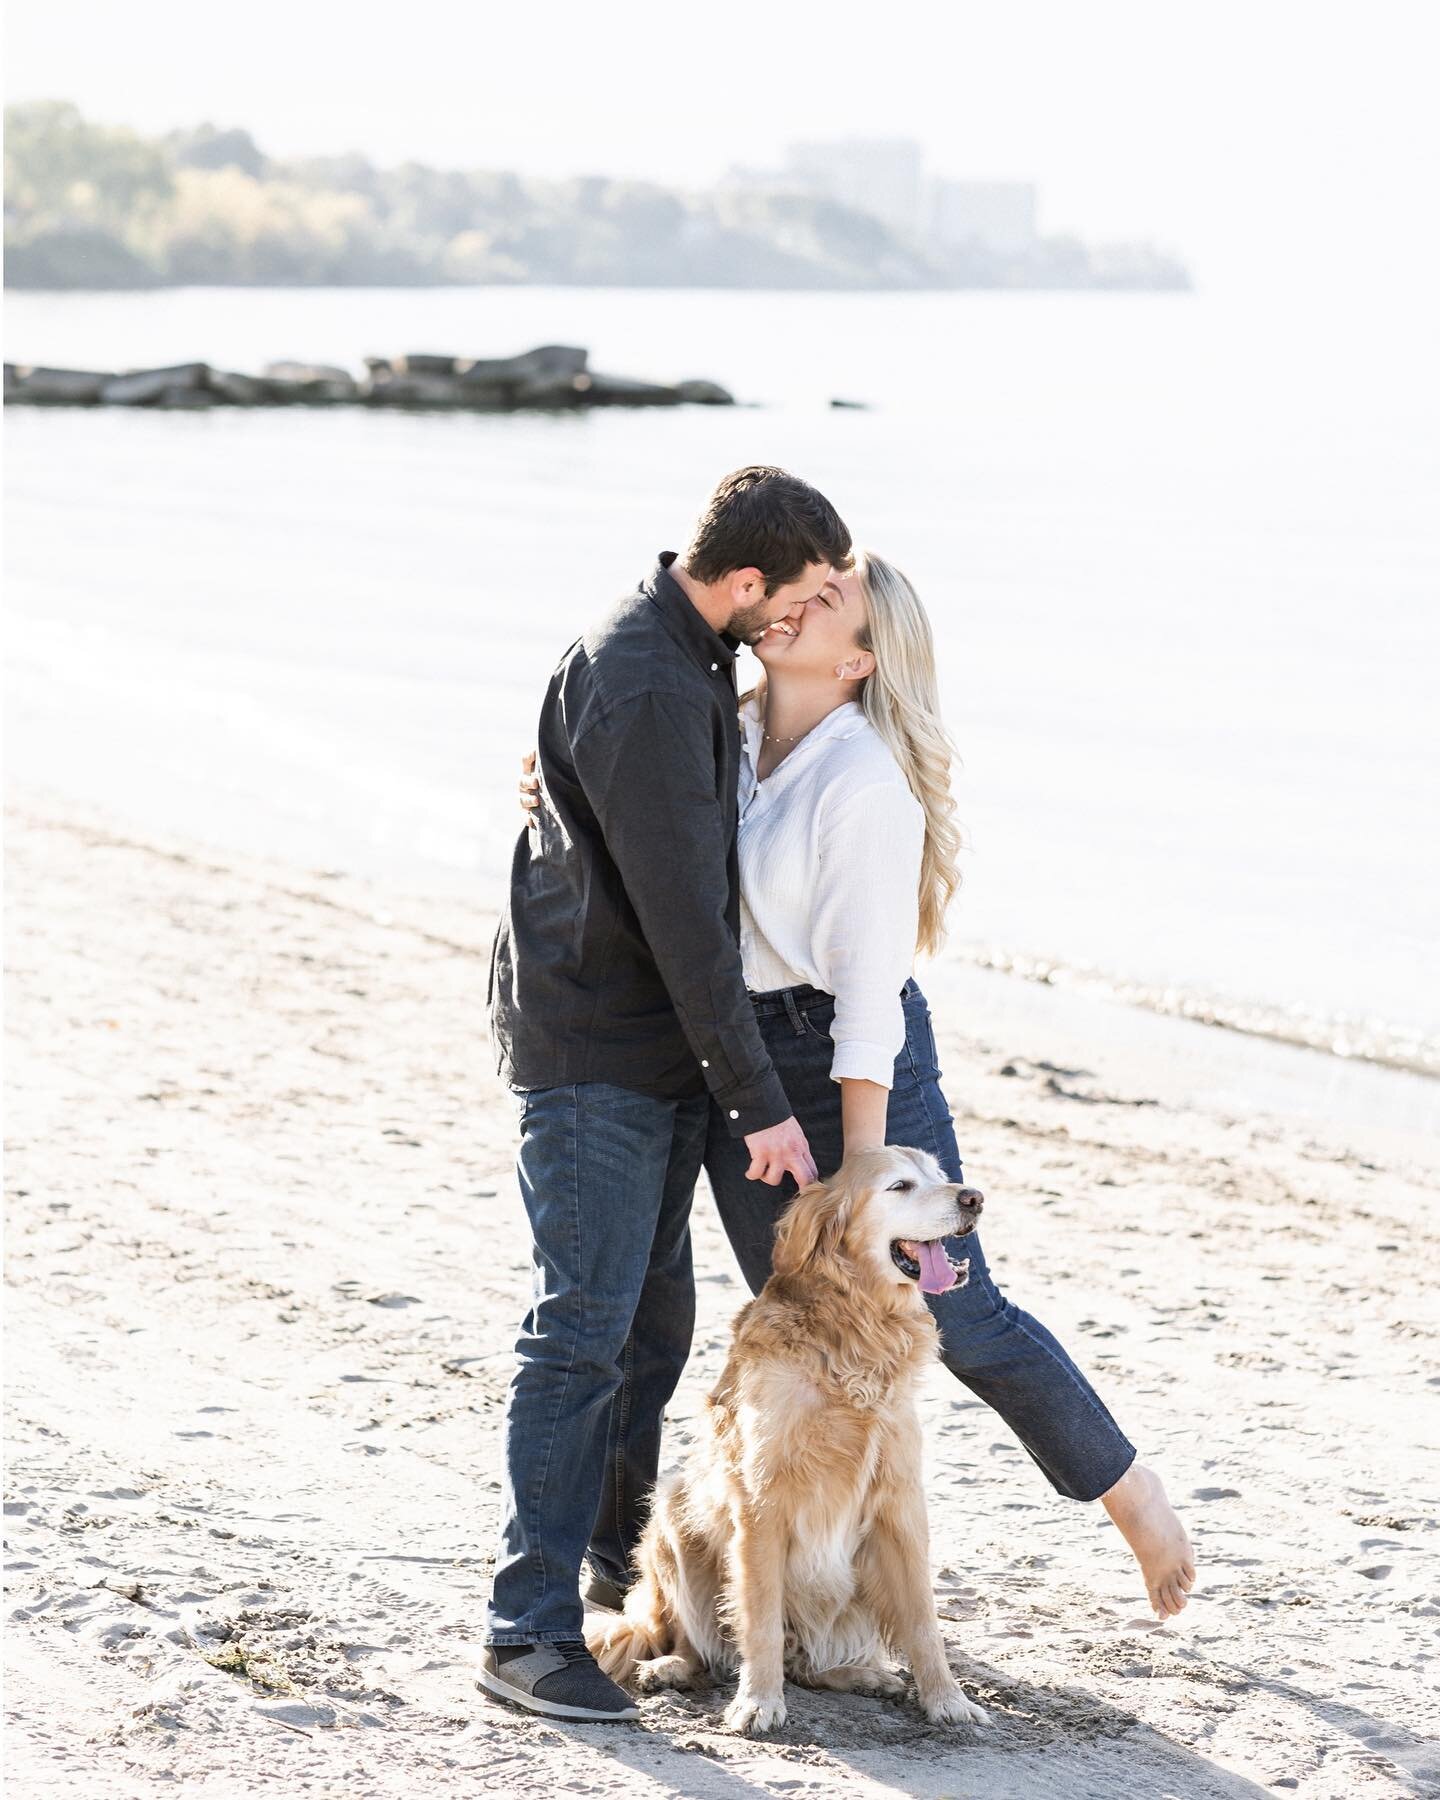 PRO TIP: include your fur babies in the first half of your engagement session while they&rsquo;re still curious and before they get bored&mdash;and if they&rsquo;re extra well behaved, like this sweet pup, why not include them even more?! Here&rsquo;